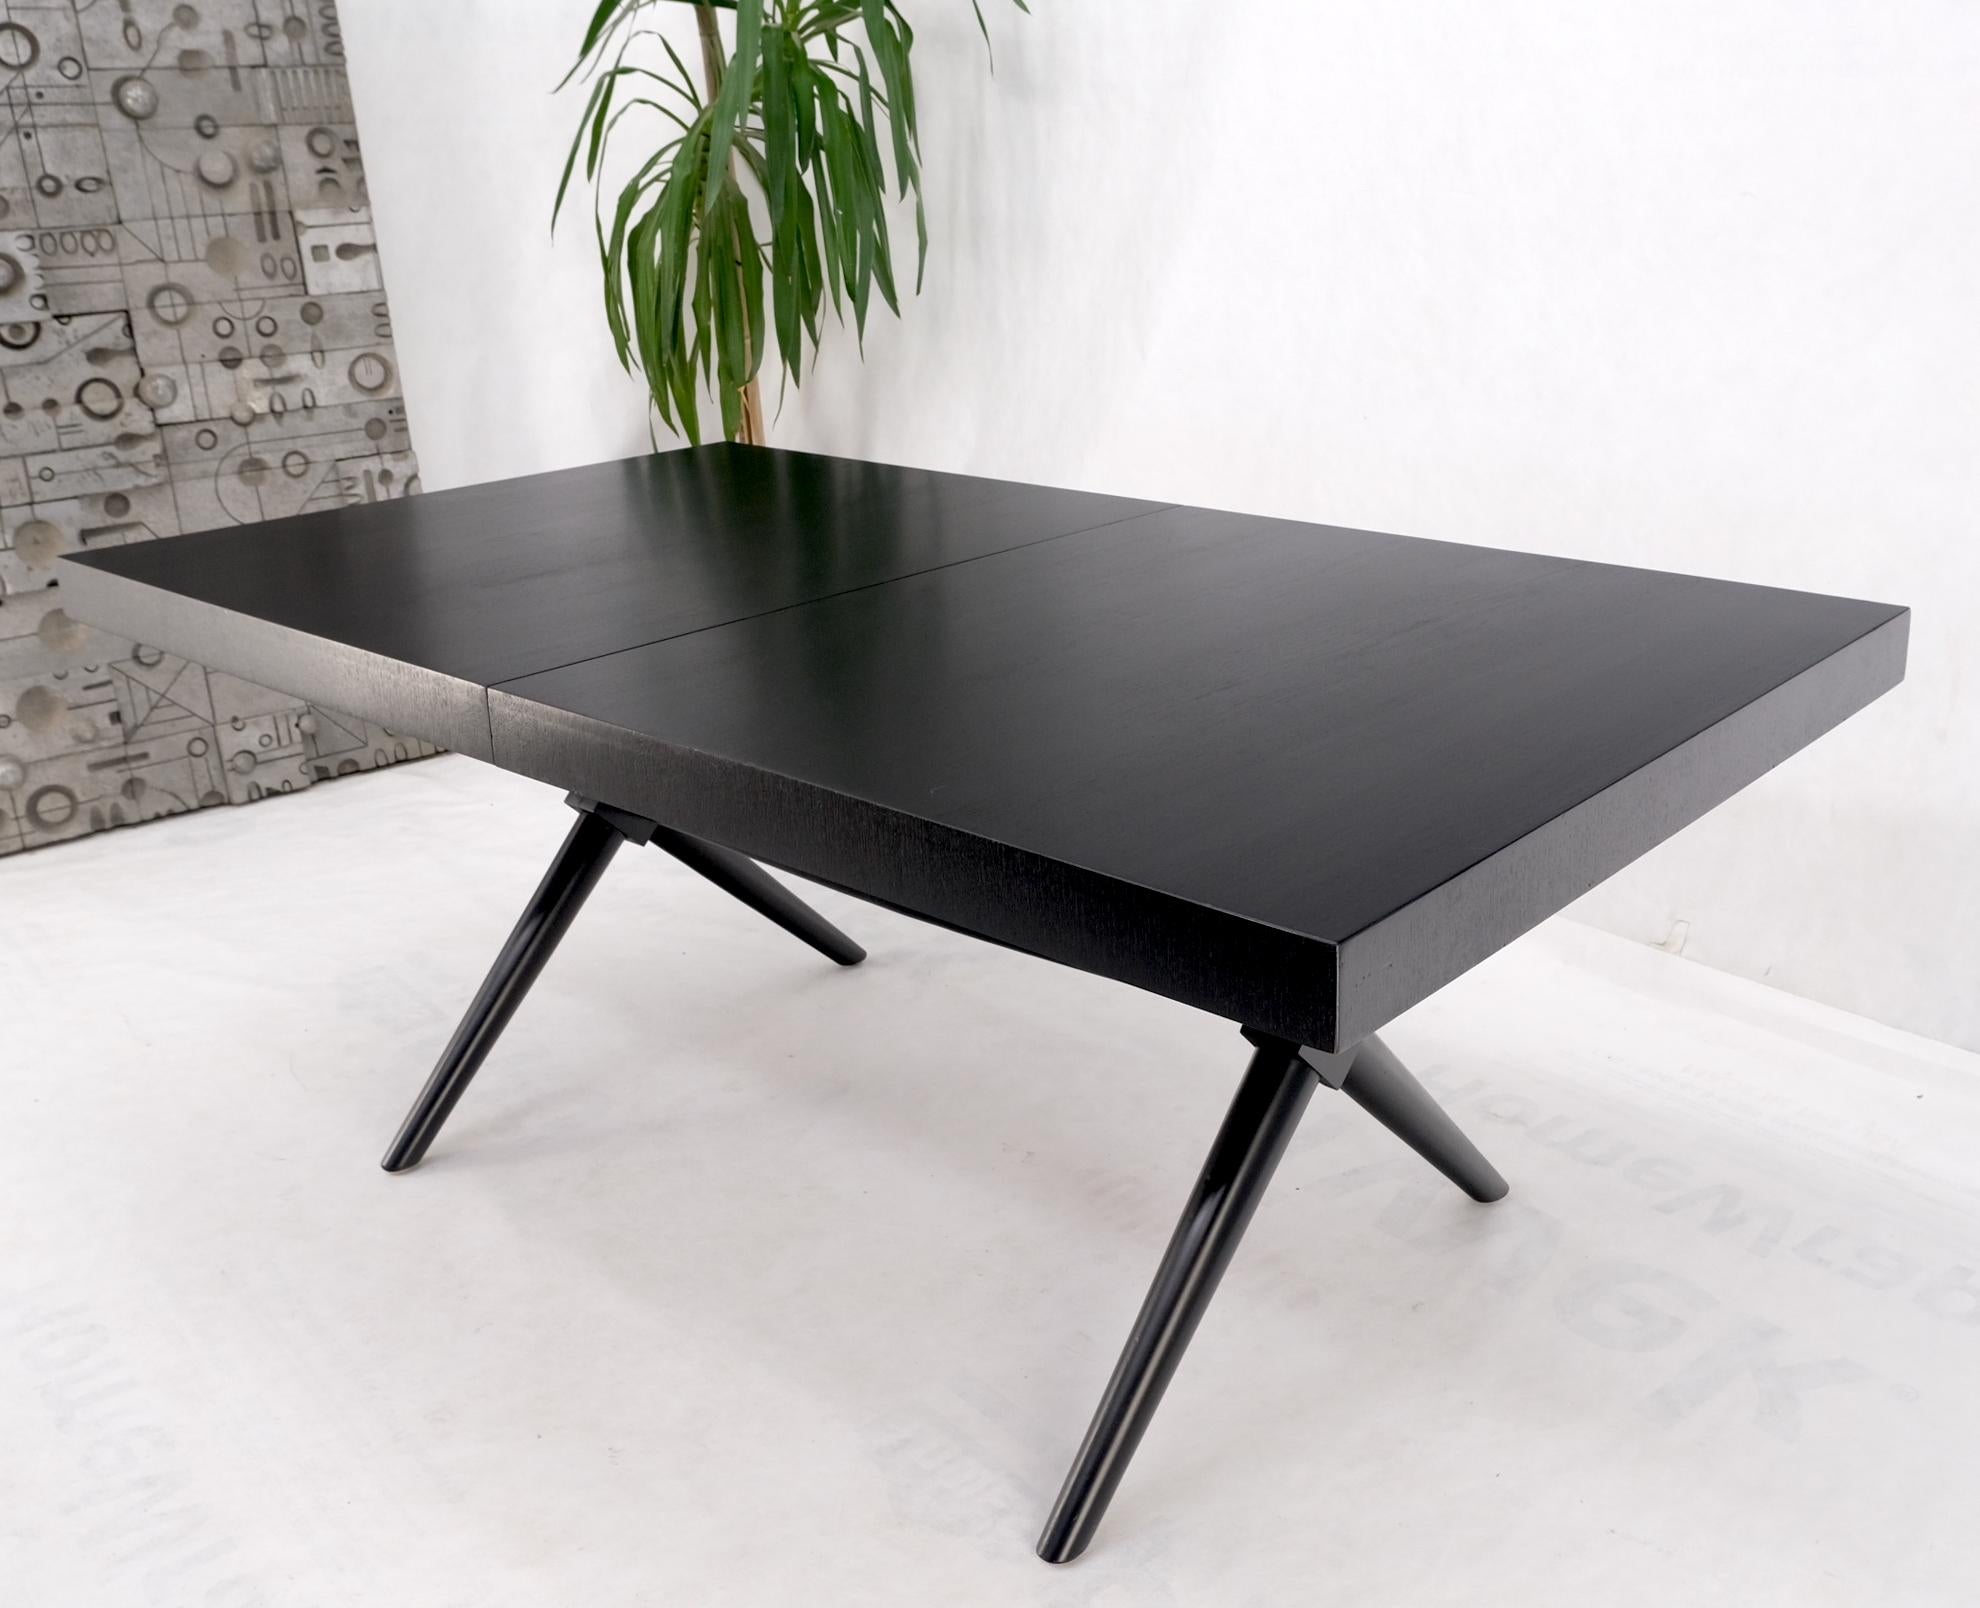 Black Lacquer One Leaf X Base Gibbings Trestle Dining Table by Widdicomb Mint For Sale 4